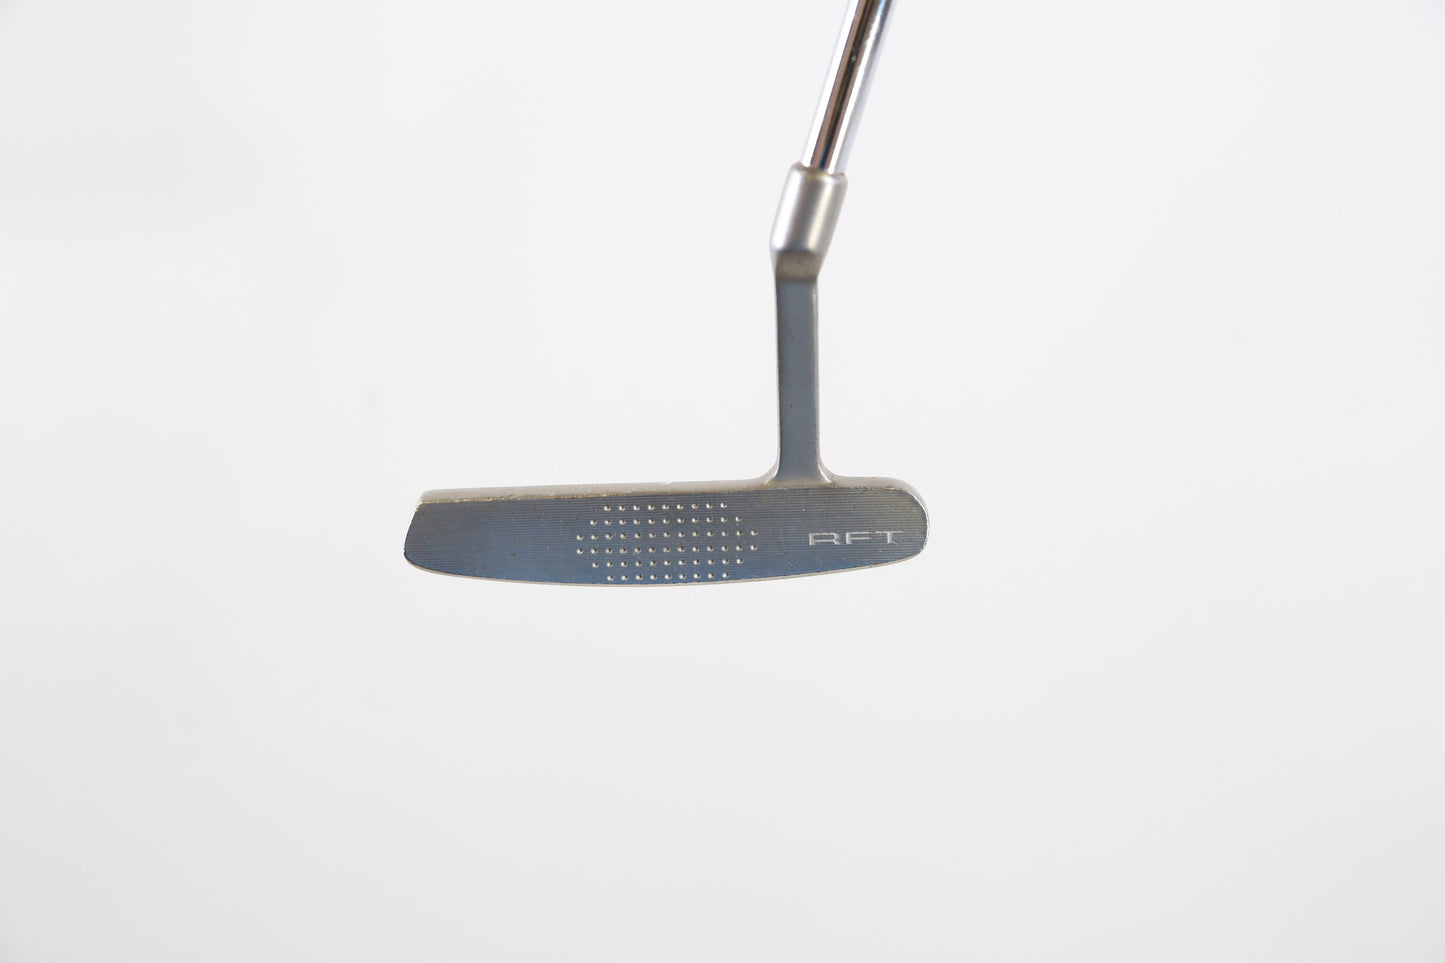 Used TearDrop TD Select 611 Putter - Right-Handed - 37 in - Blade